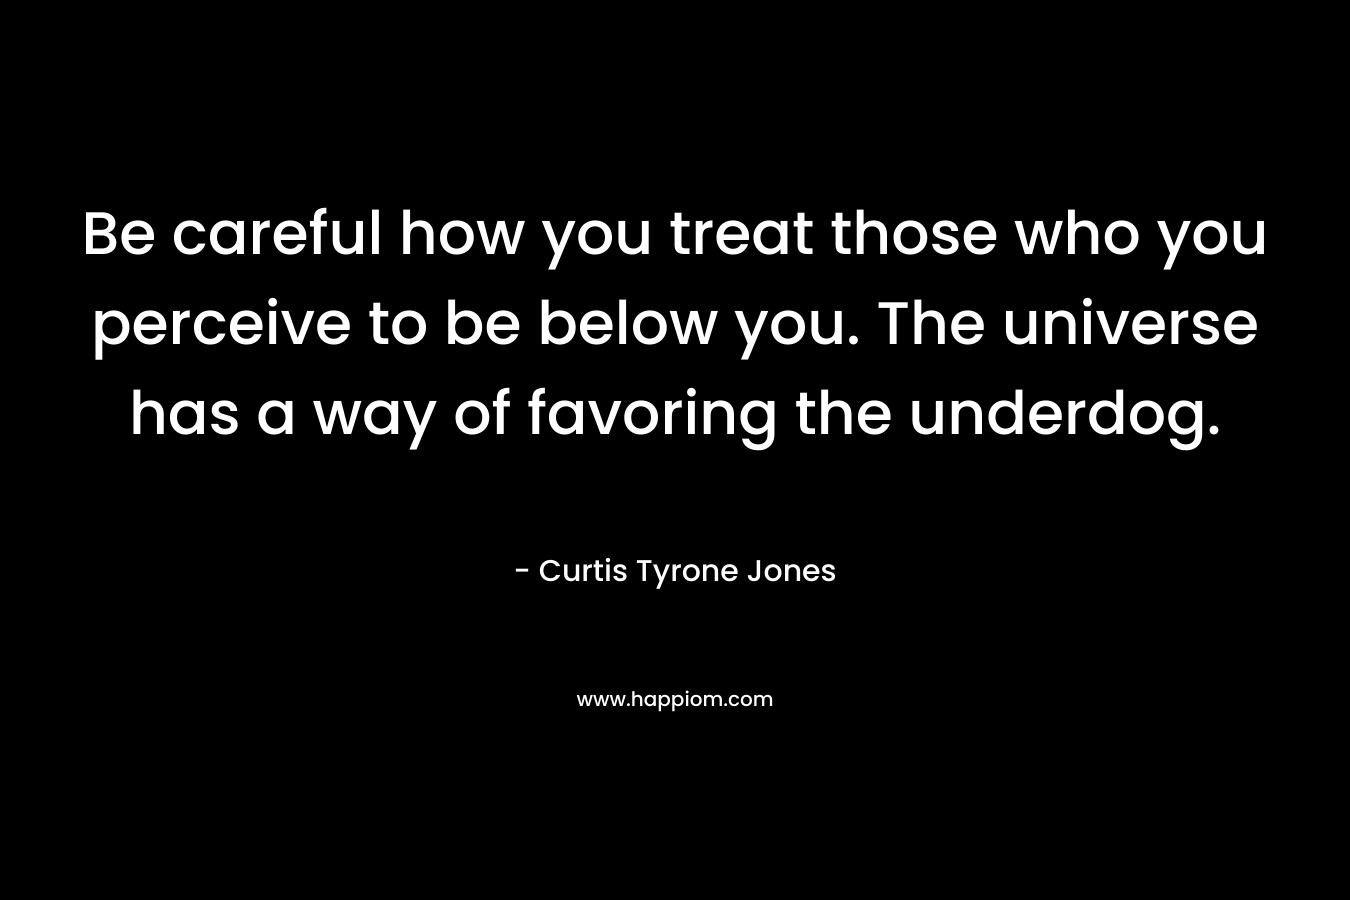 Be careful how you treat those who you perceive to be below you. The universe has a way of favoring the underdog. – Curtis Tyrone Jones